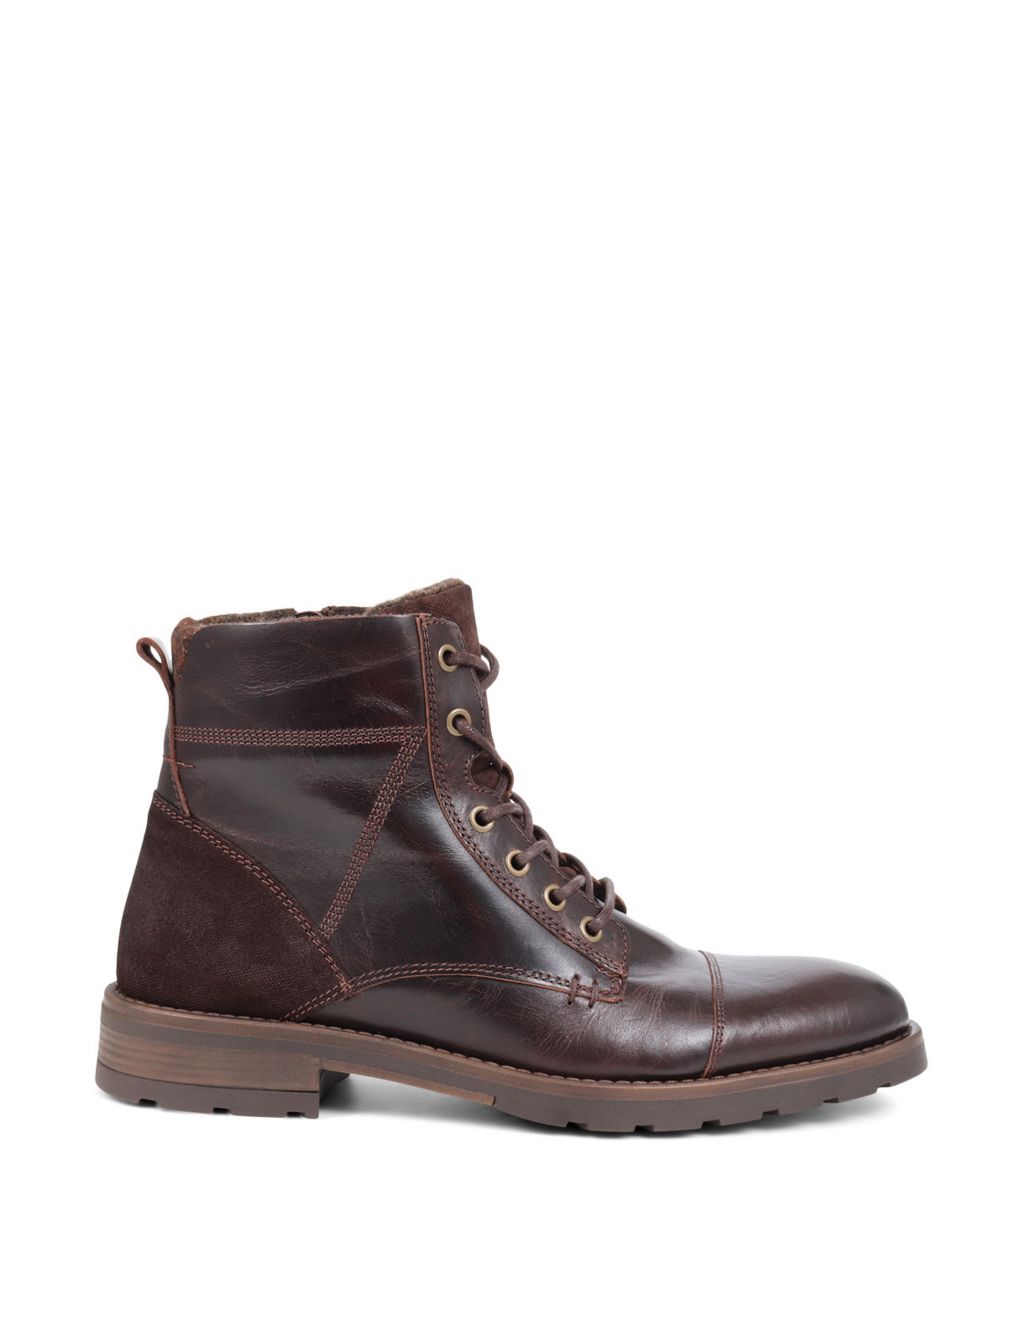 Leather Casual Boots | Jones Bootmaker | M&S